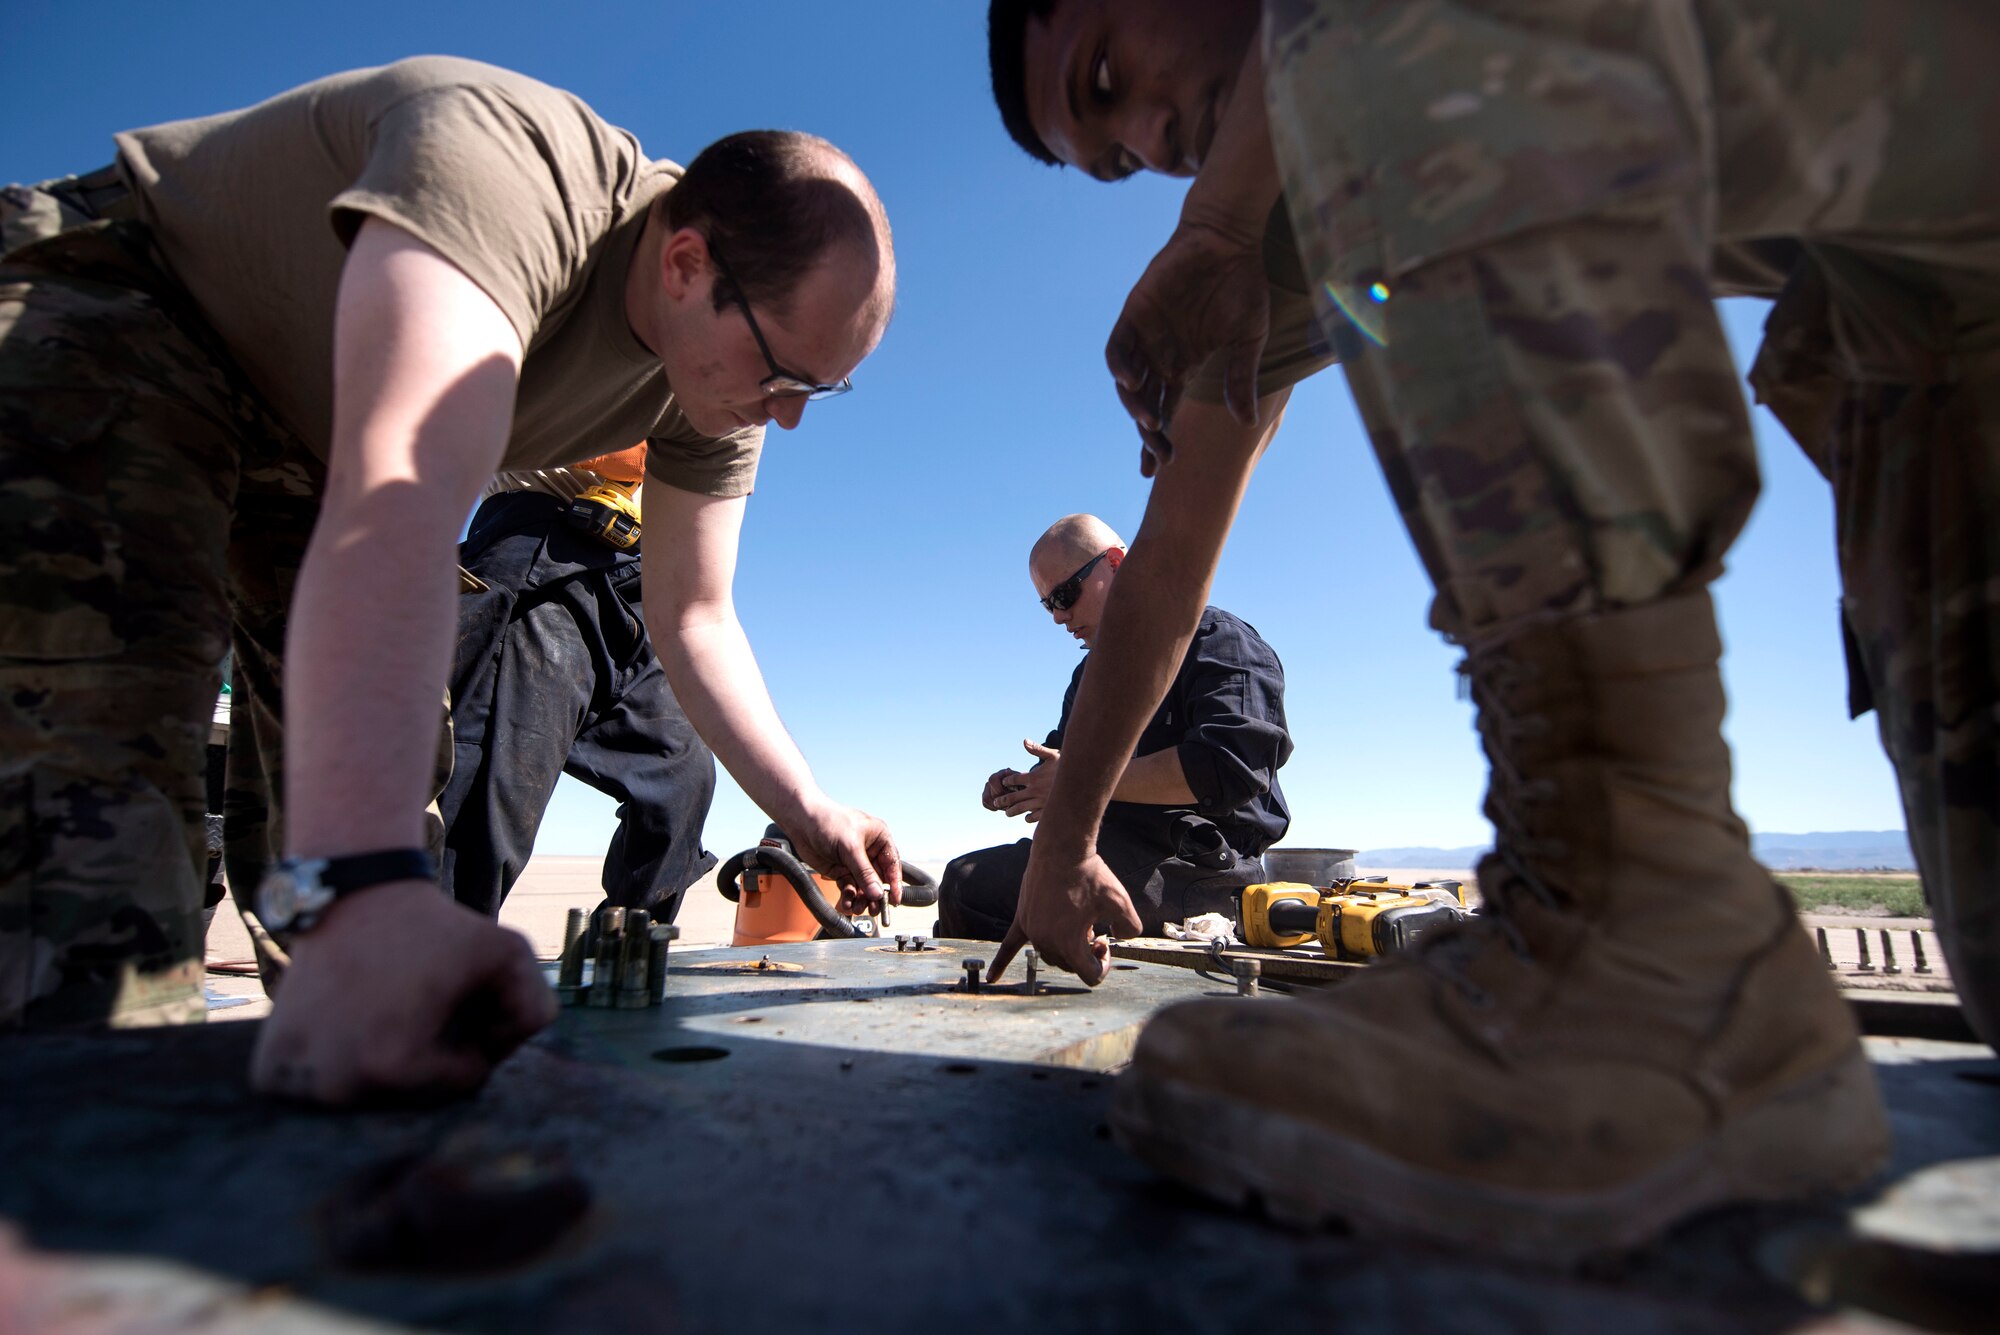 Airman 1st Class Curtis Mark (left) and Airman 1st Class Sharn Lucas (right), 49th Civil Engineer Squadron electrical power production technicians, reassemble a front sheave housing plate on the flightline, on Holloman Air Force Base, N.M., April 21, 2020. In addition to ensuring barriers are functional, they maintain power supply to buildings, as well as the anti-vehicle barriers found across the base. (U.S. Air Force photo by Staff Sgt. Christine Groening)